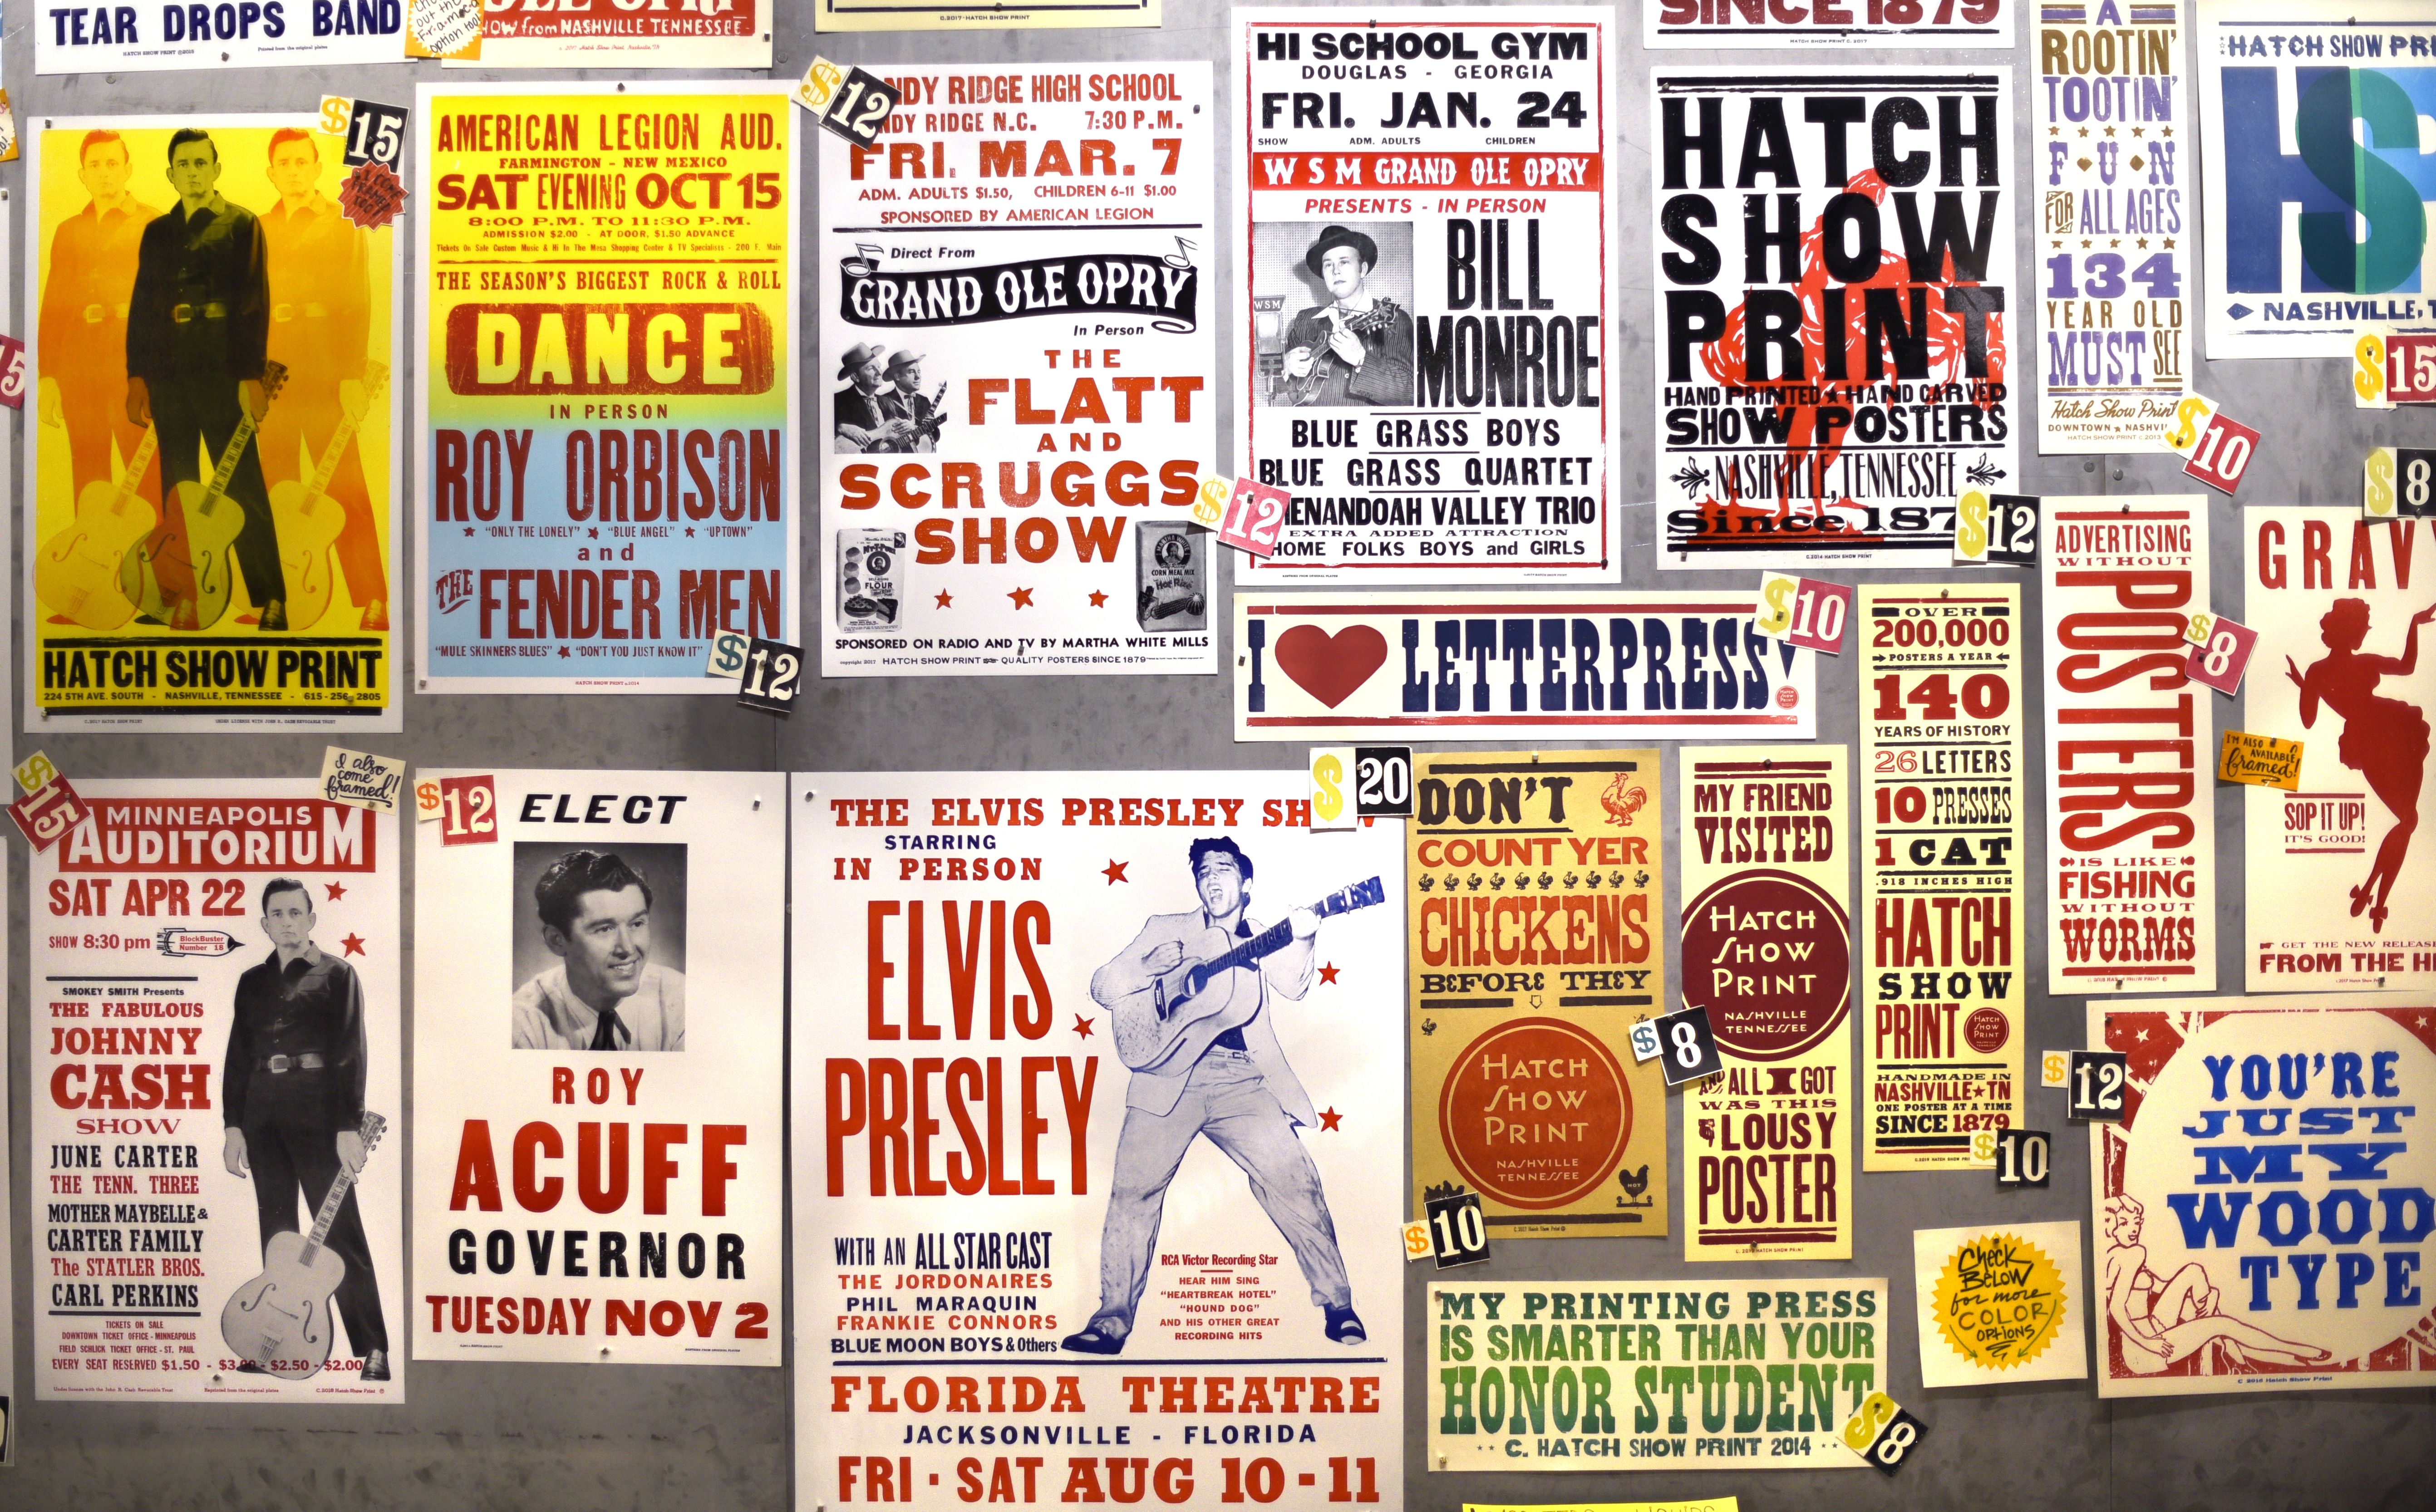 A selection of hand-printed posters for sale at Hatch Show Print. Photo: Robert Alexander/Getty Images